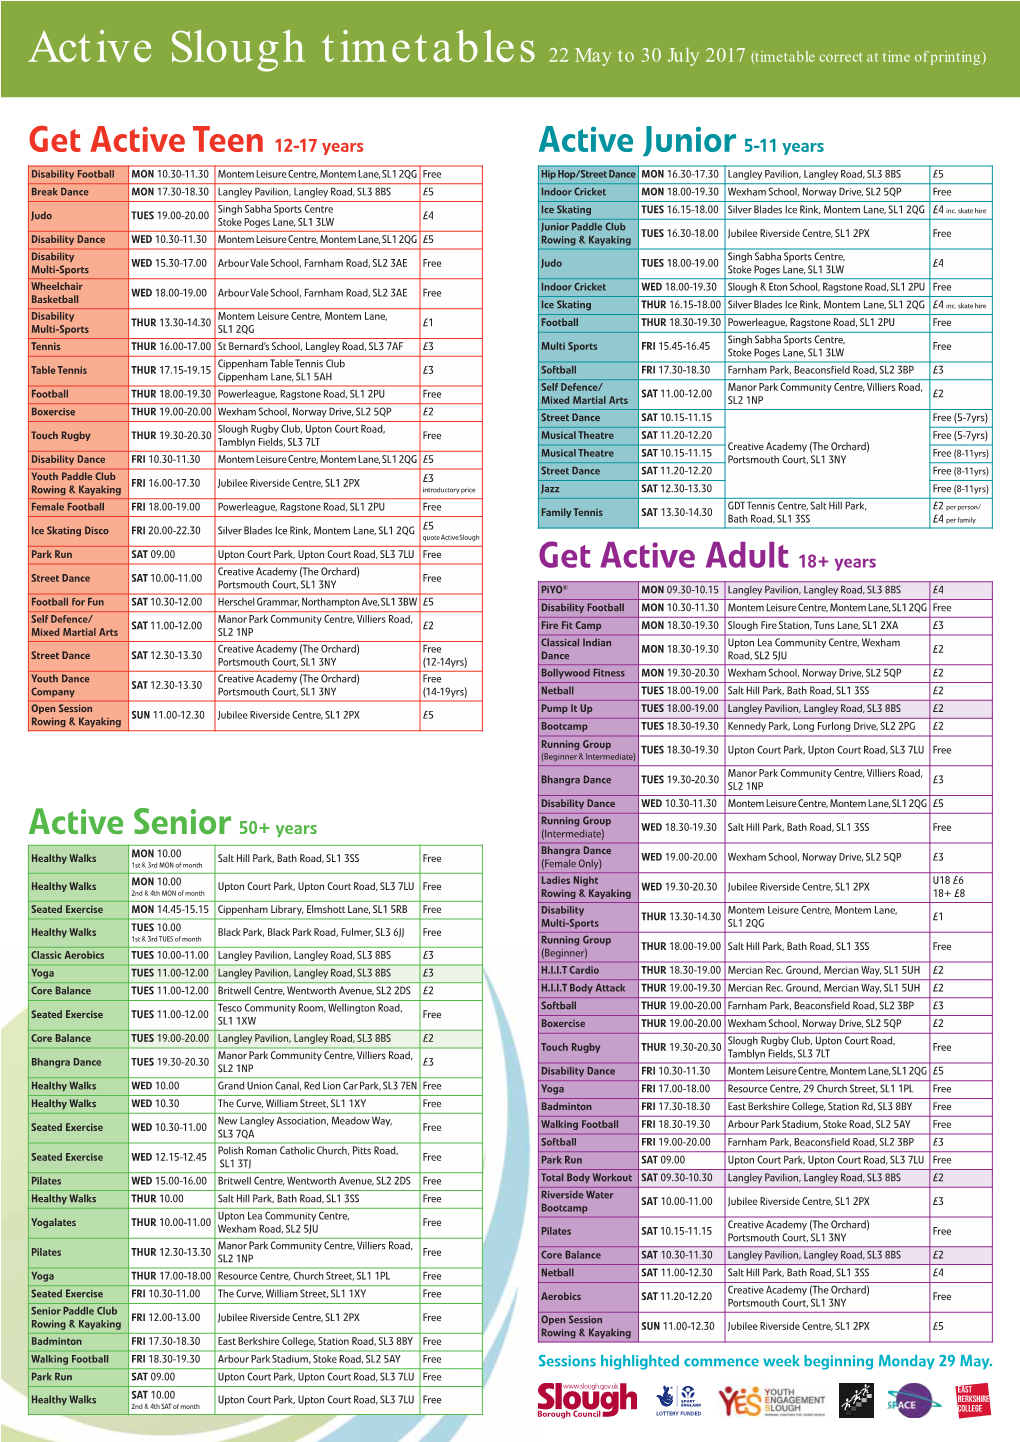 Active Slough Timetables 22 May to 30 July 2017 (Timetable Correct at Time of Printing)